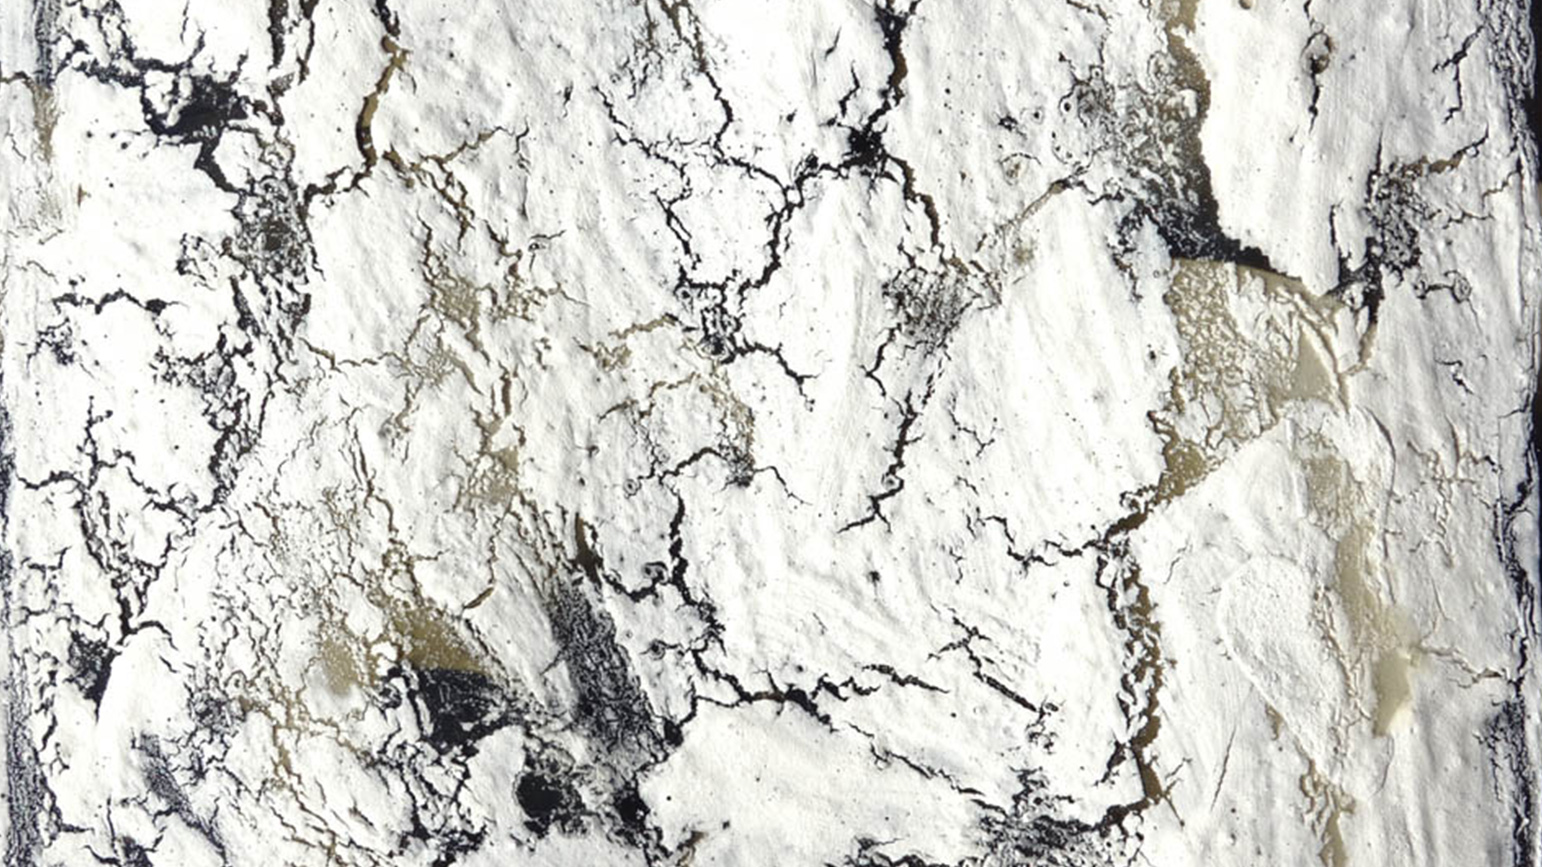 Abstract painting of an image almost entirely covered in chalky bone meal